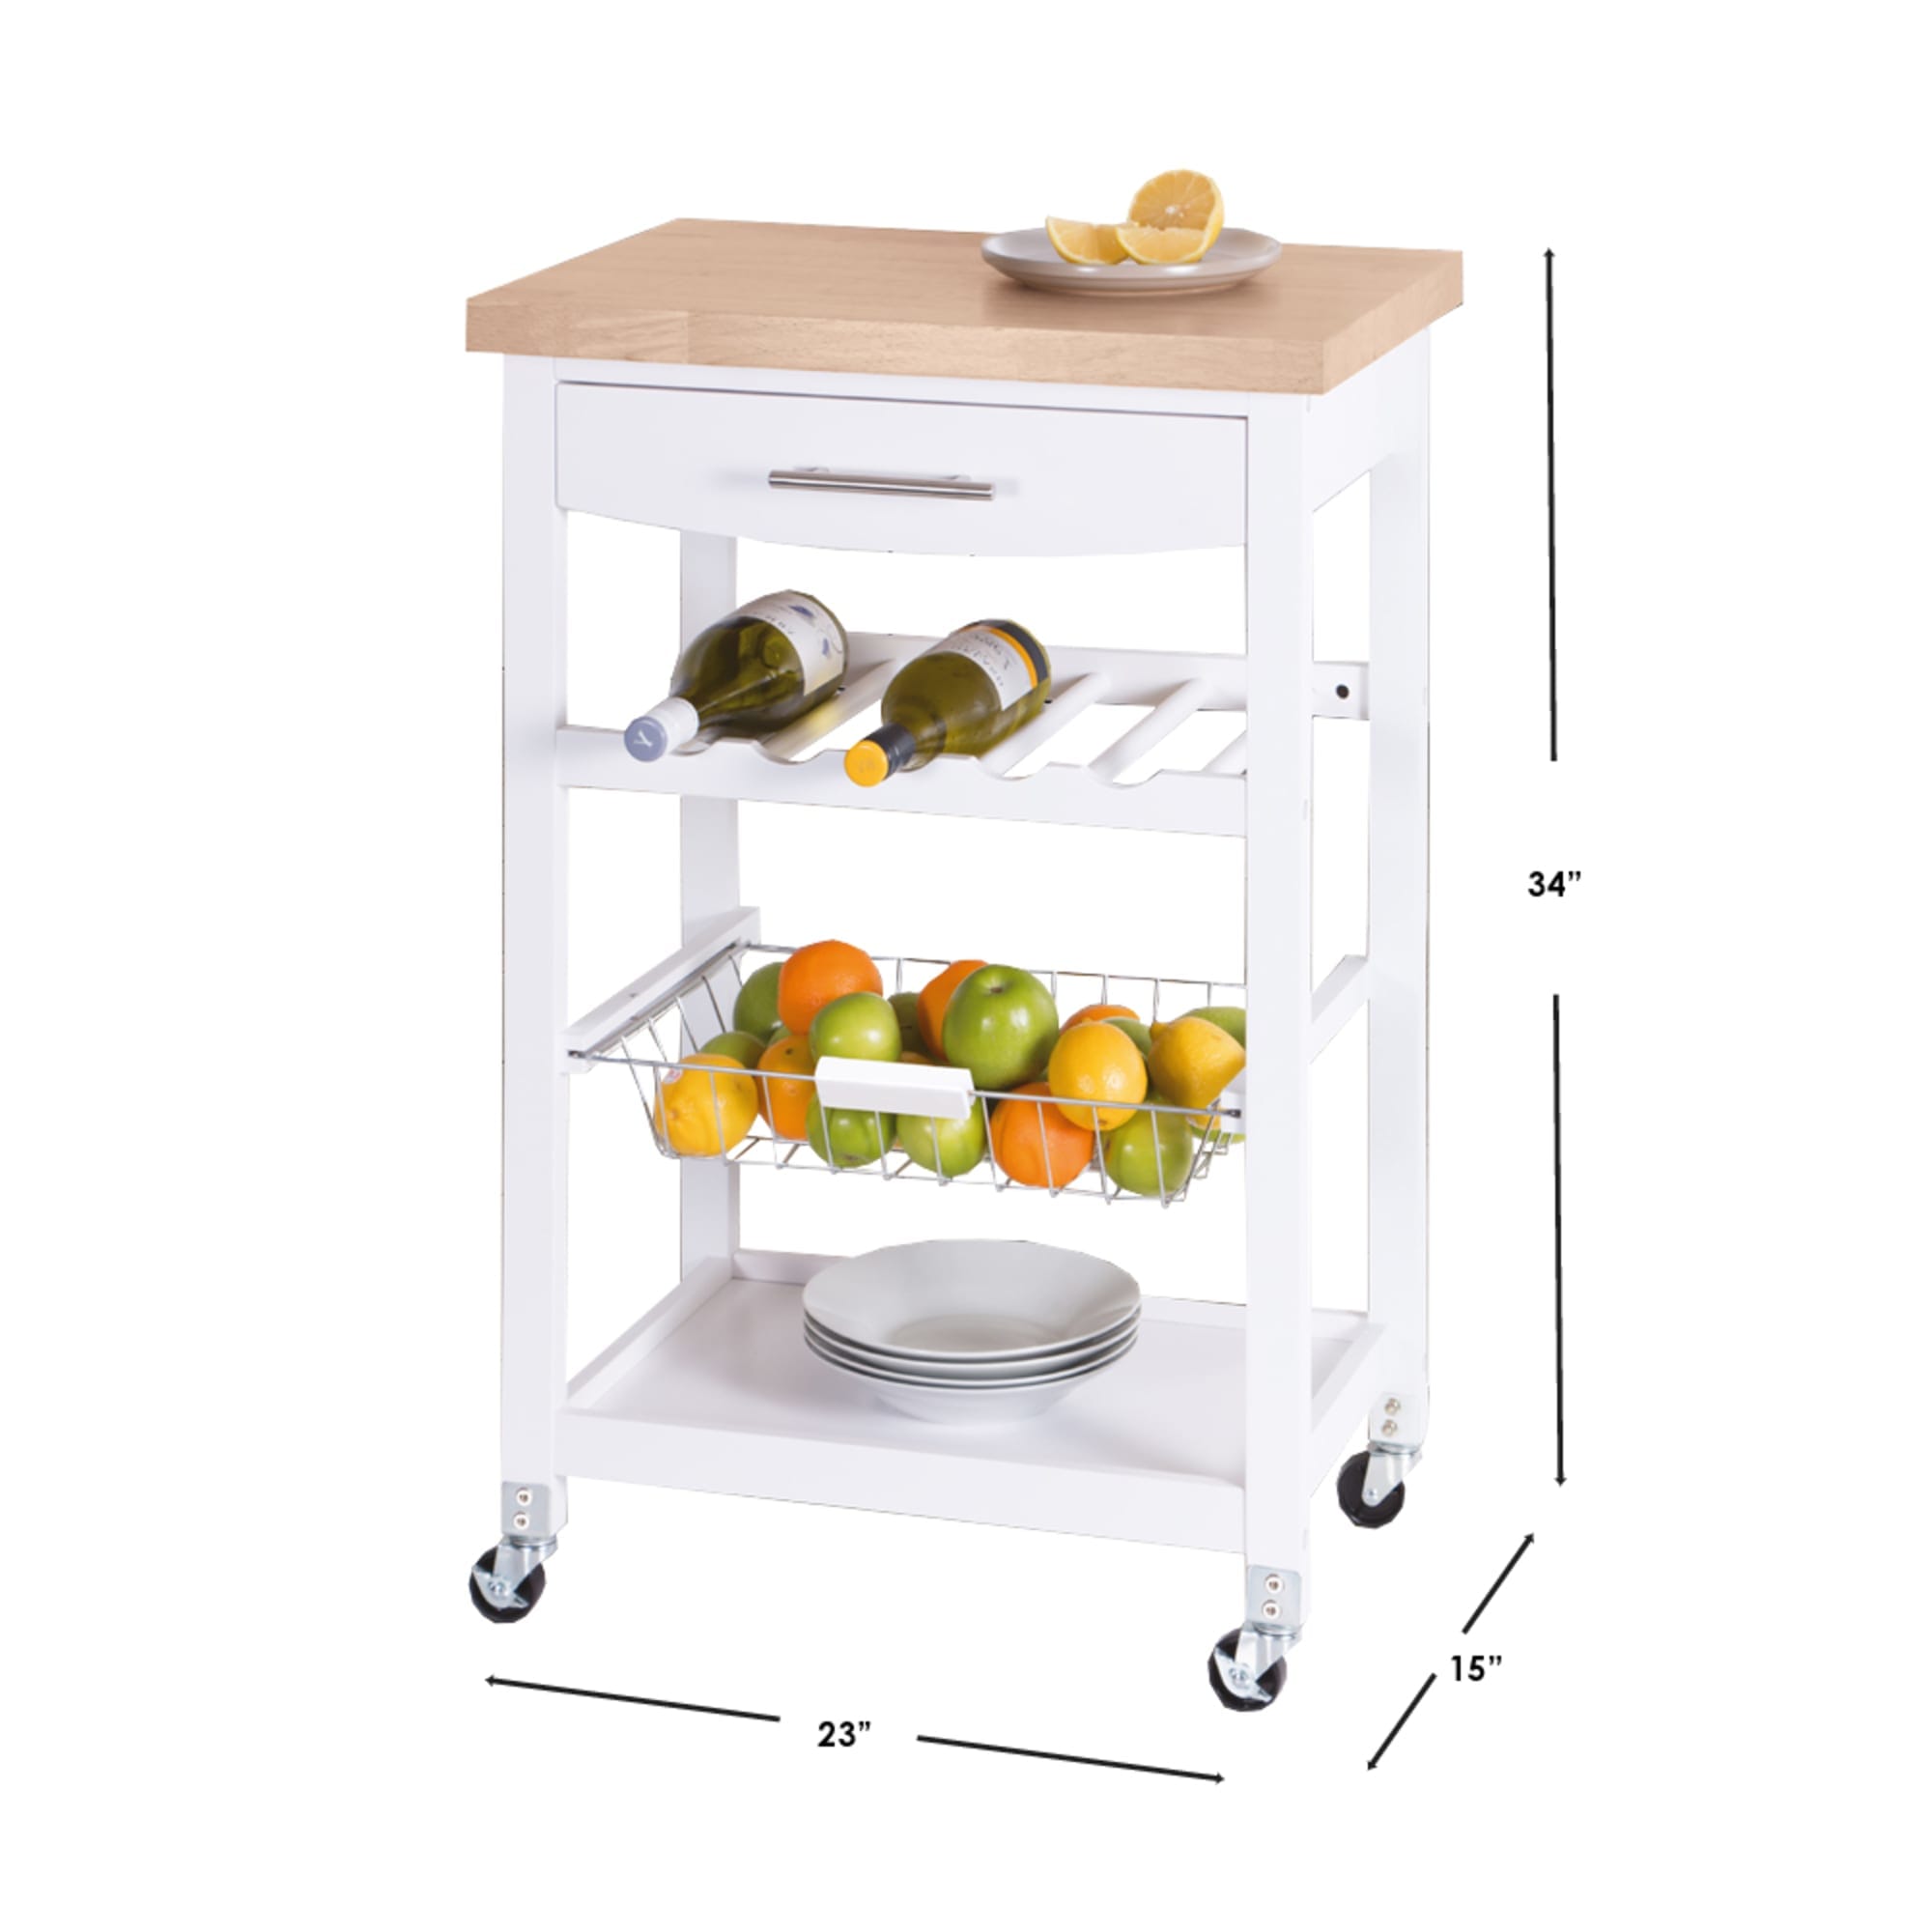 Home Basics 4 Tier Kitchen Trolley with Wood Top, White $100 EACH, CASE PACK OF 1